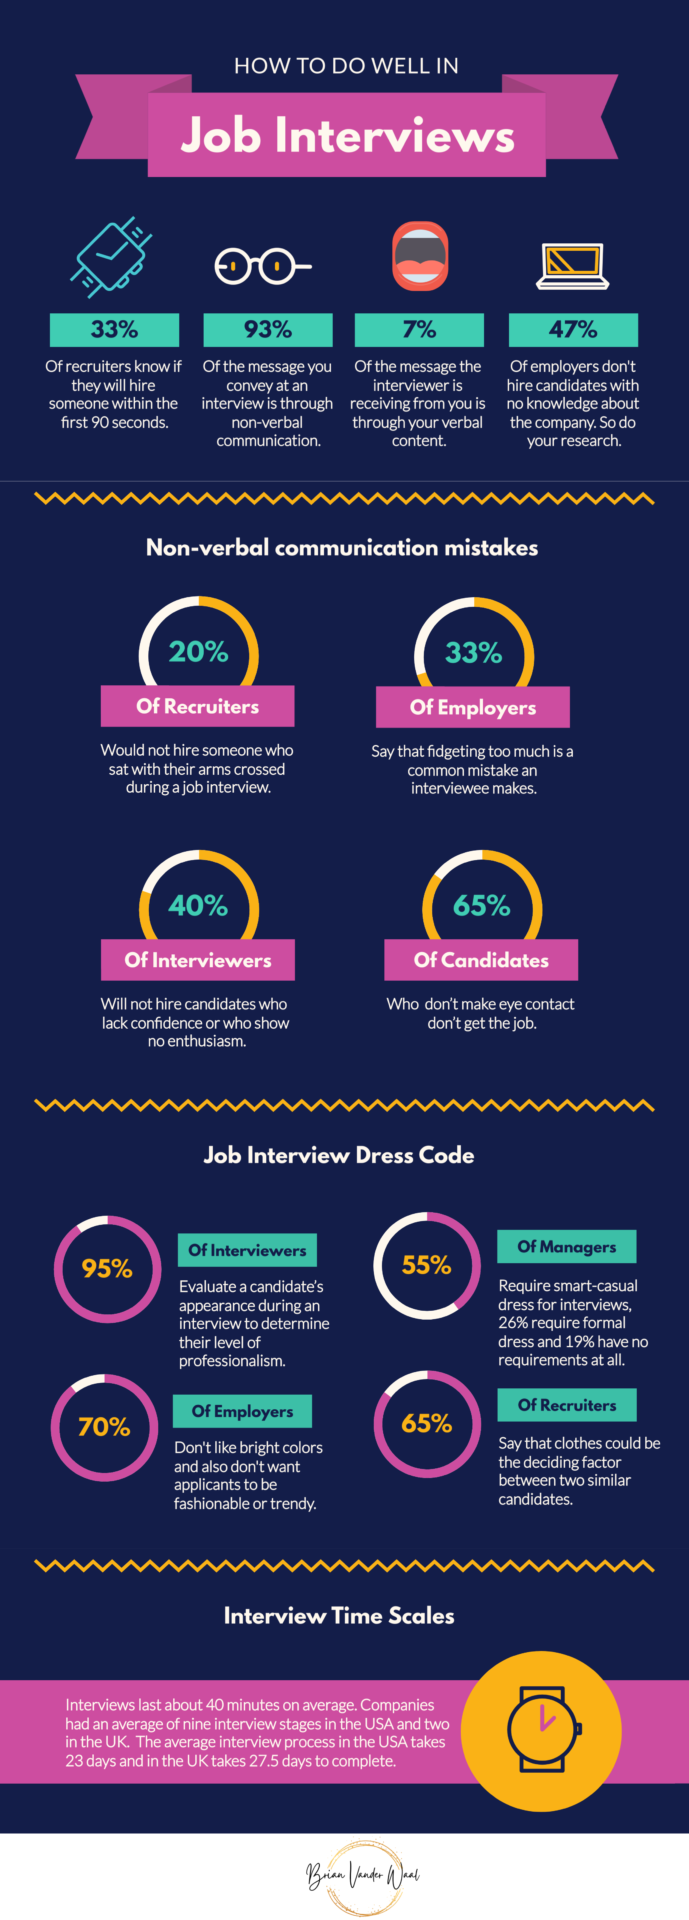 Infographic. 33% of recruiters know if they will hire someone within the first 90 seconds. 93% of the message you convey at an interview is through non-verbal communication. 7% of the message the interviewer is receiving from you is through your verbal content. 47% of employers don’t hire candidates with no knowledge about the company. So do your research. Non-verbal communication mistakes: 20% of recruiters would not hire someone who sat with their arms crossed during a job interview.